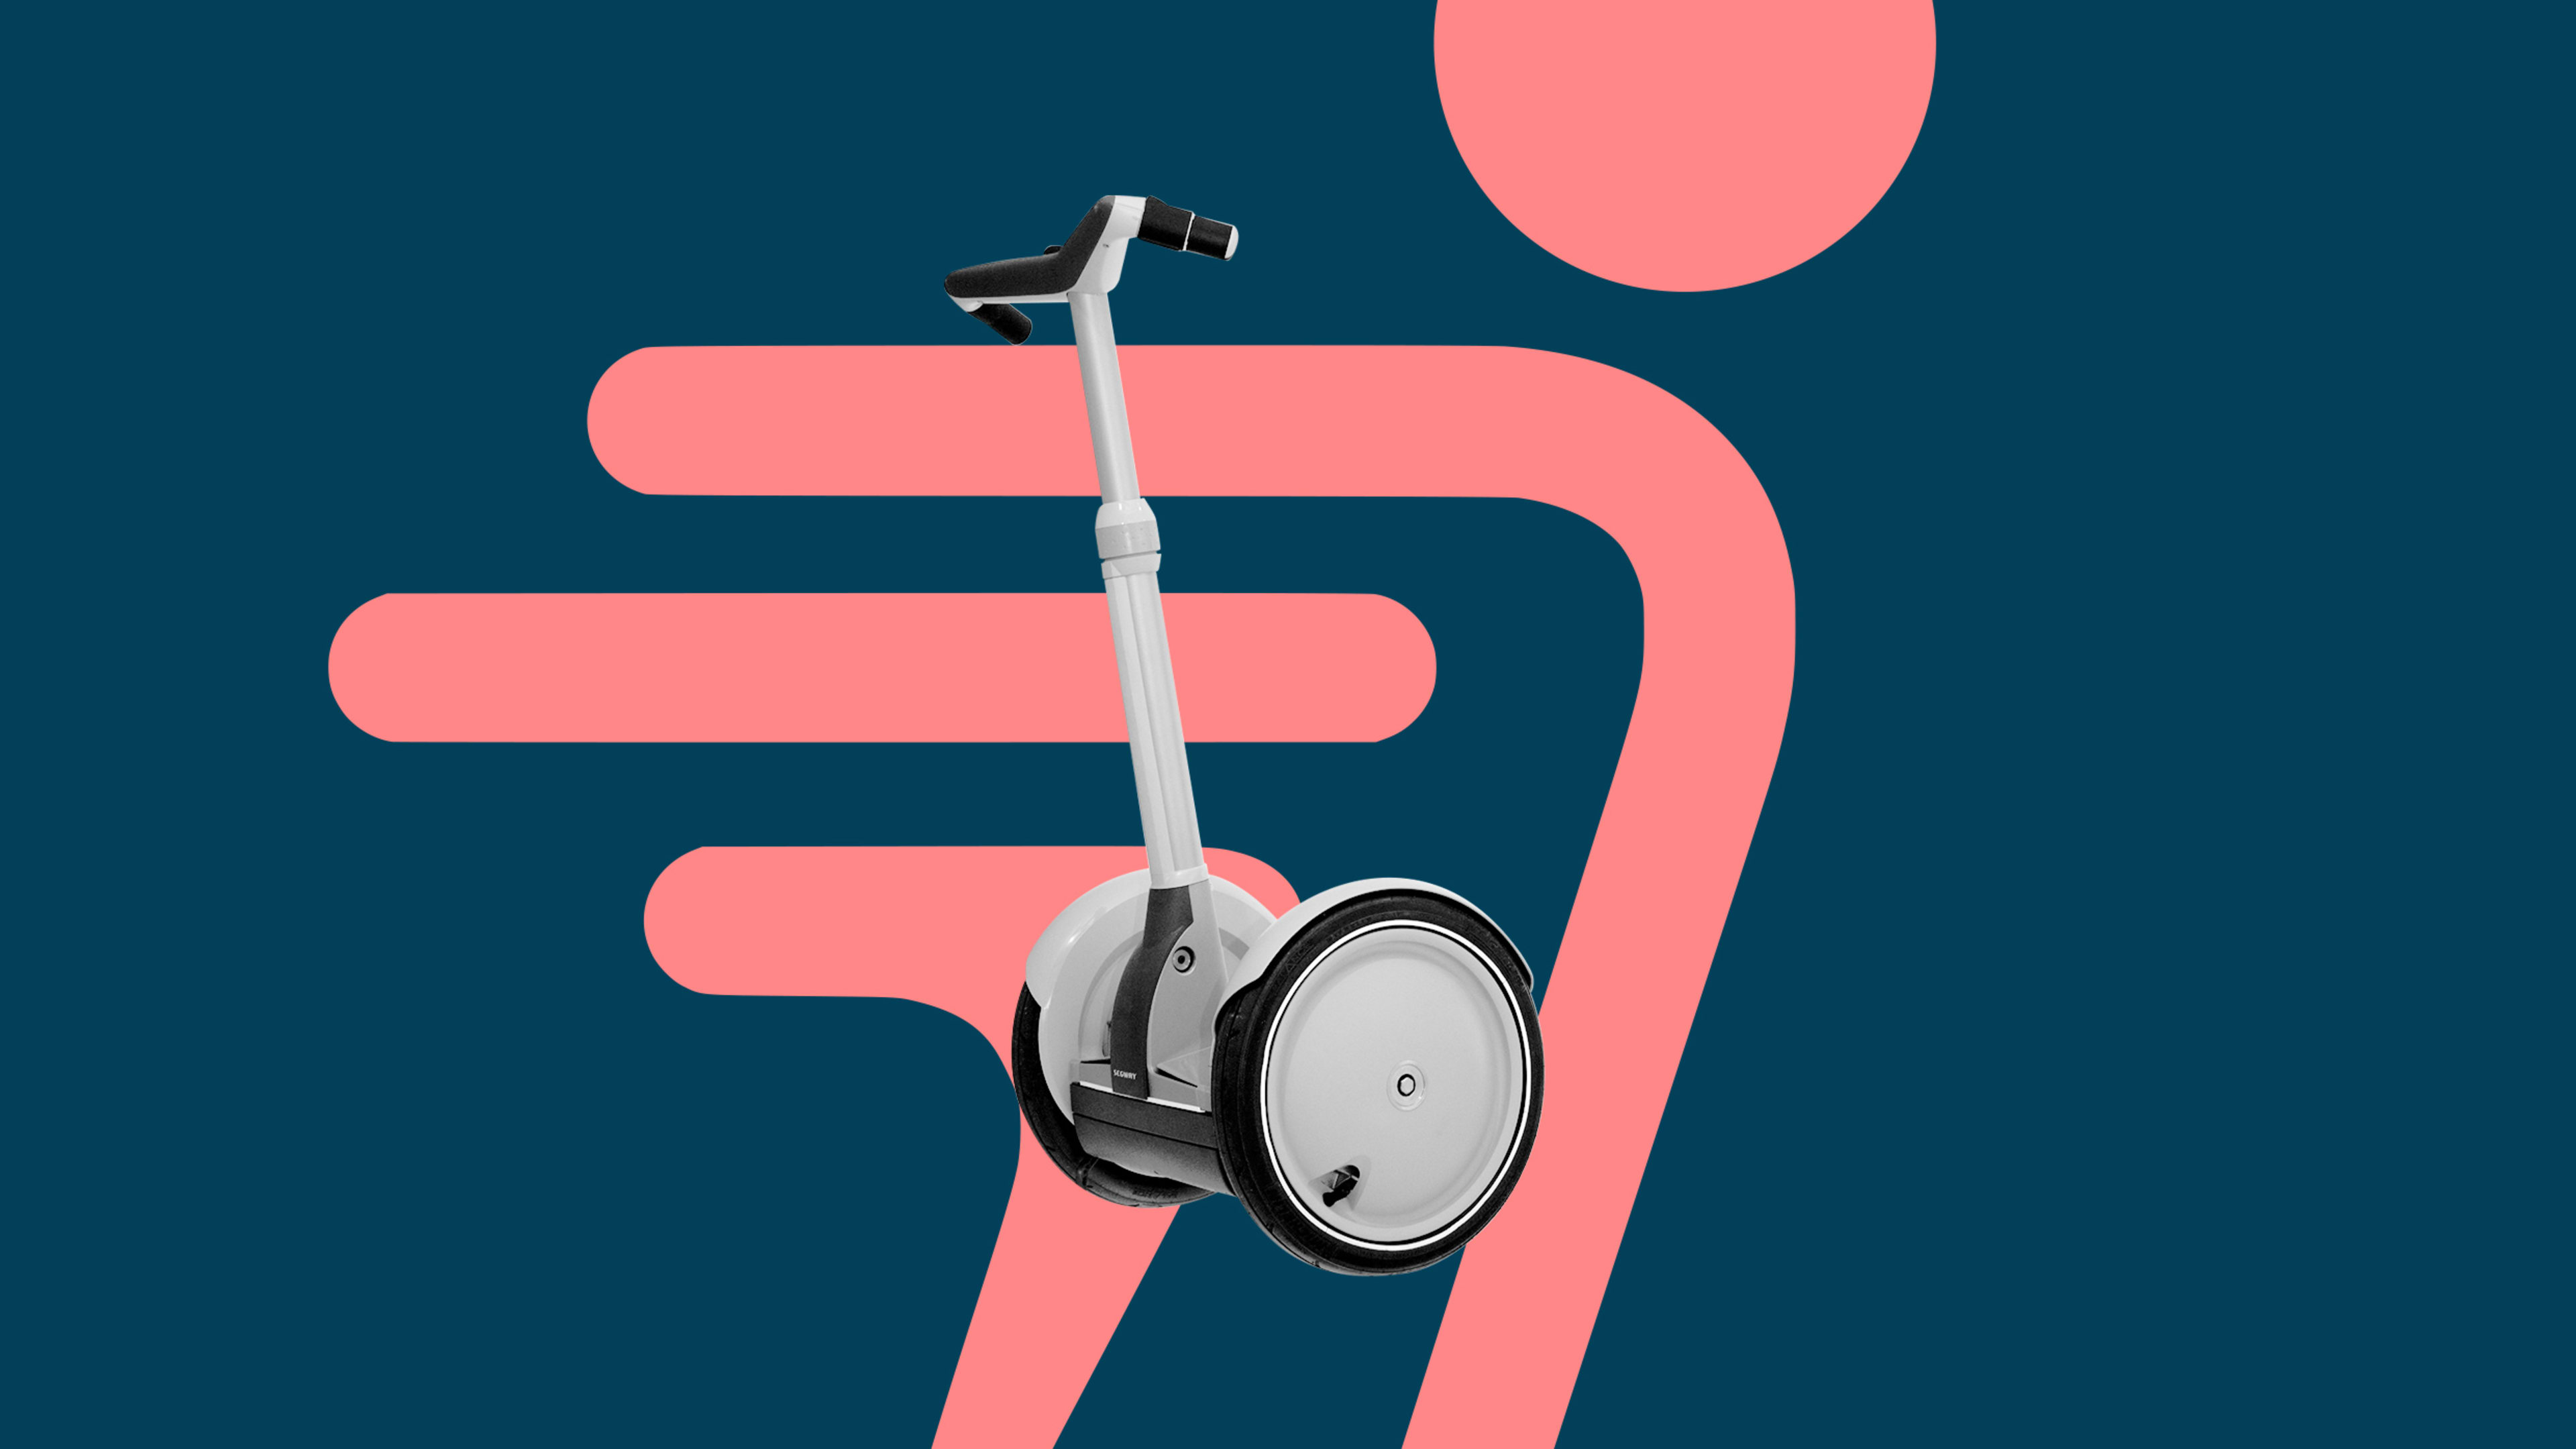 Exclusive: Segway, the most hyped invention since the Macintosh, ends production